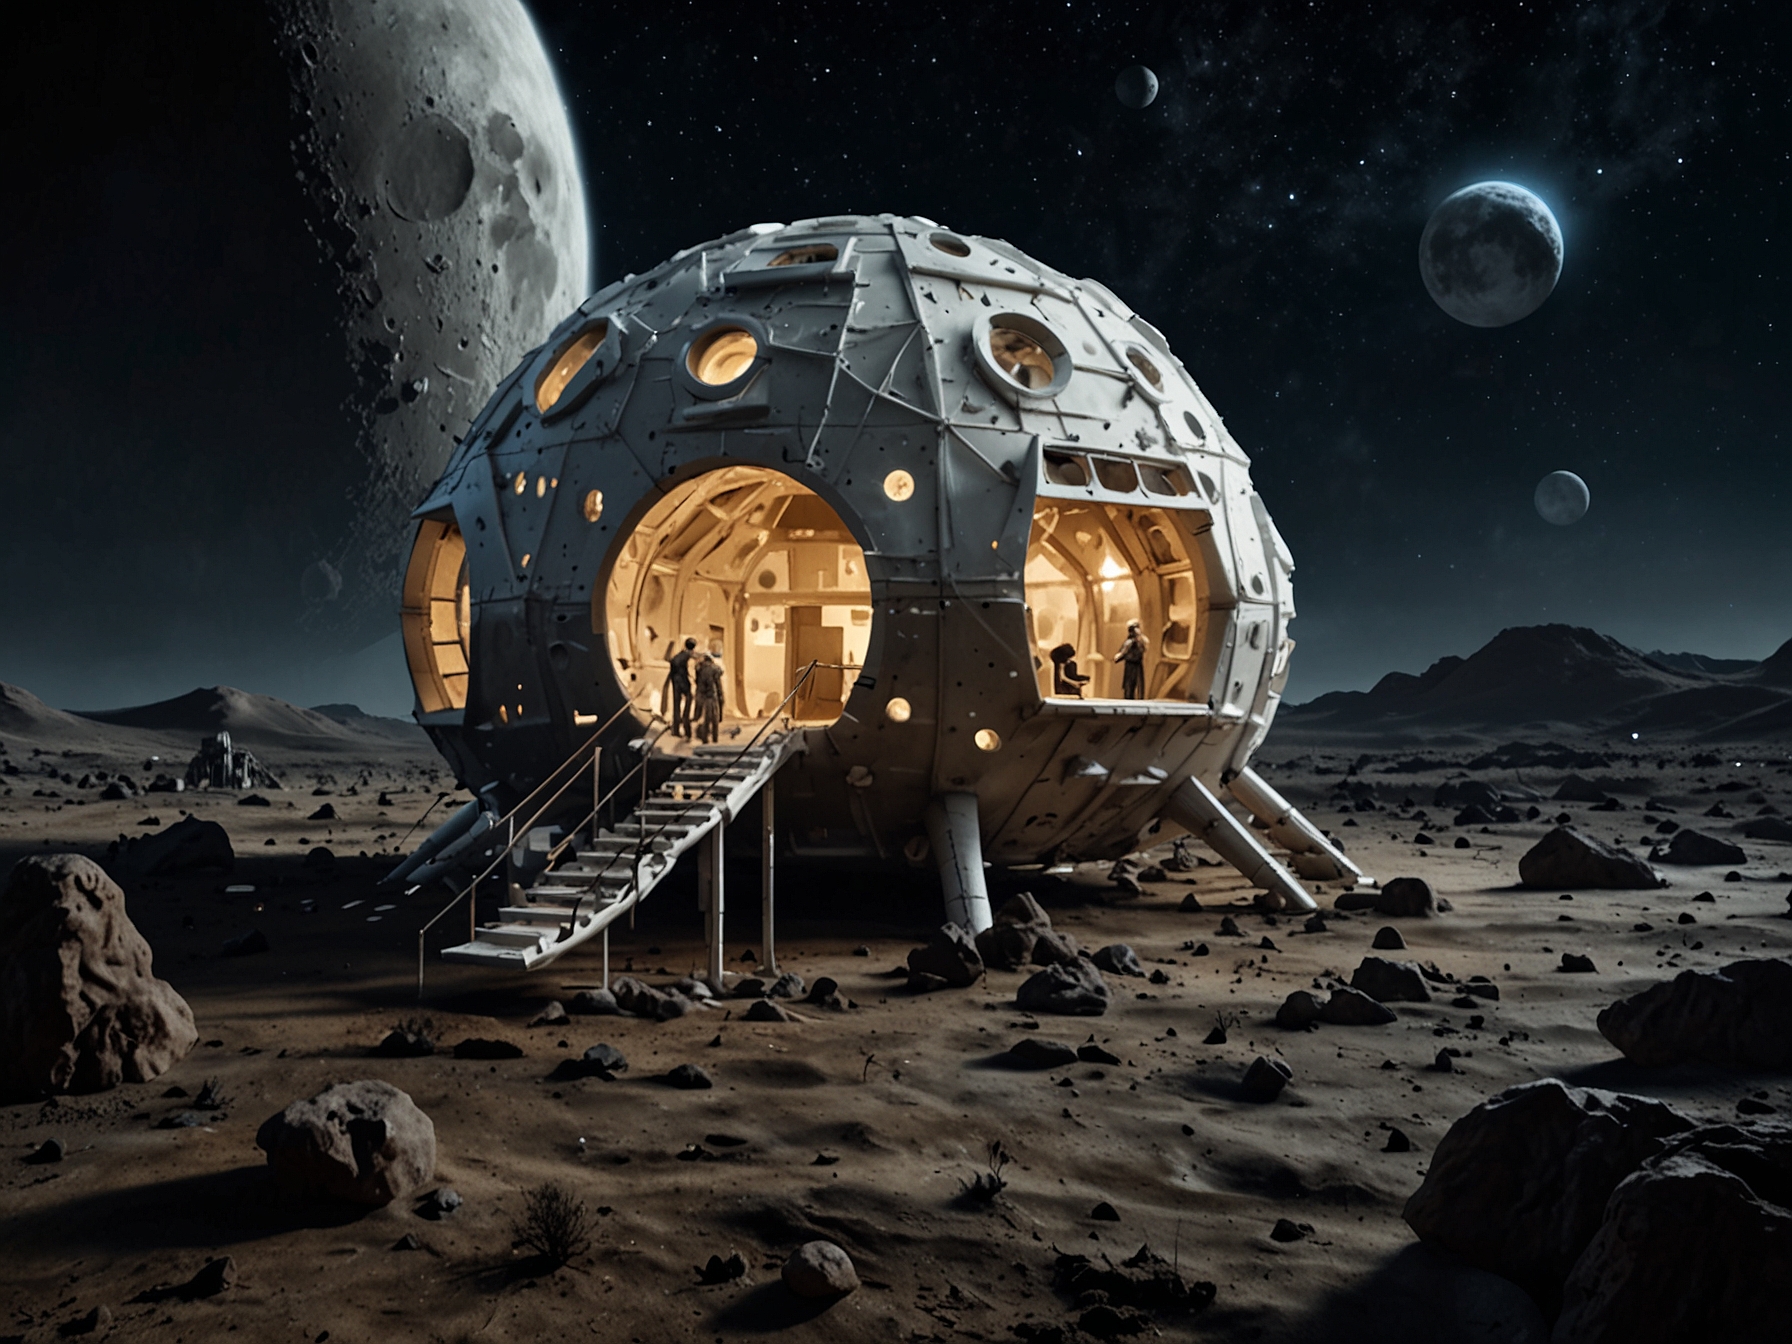 Illustration of a futuristic space habitat constructed from mycelium-based materials on the surface of the Moon, showcasing the innovative use of fungal mycelium in space architecture.